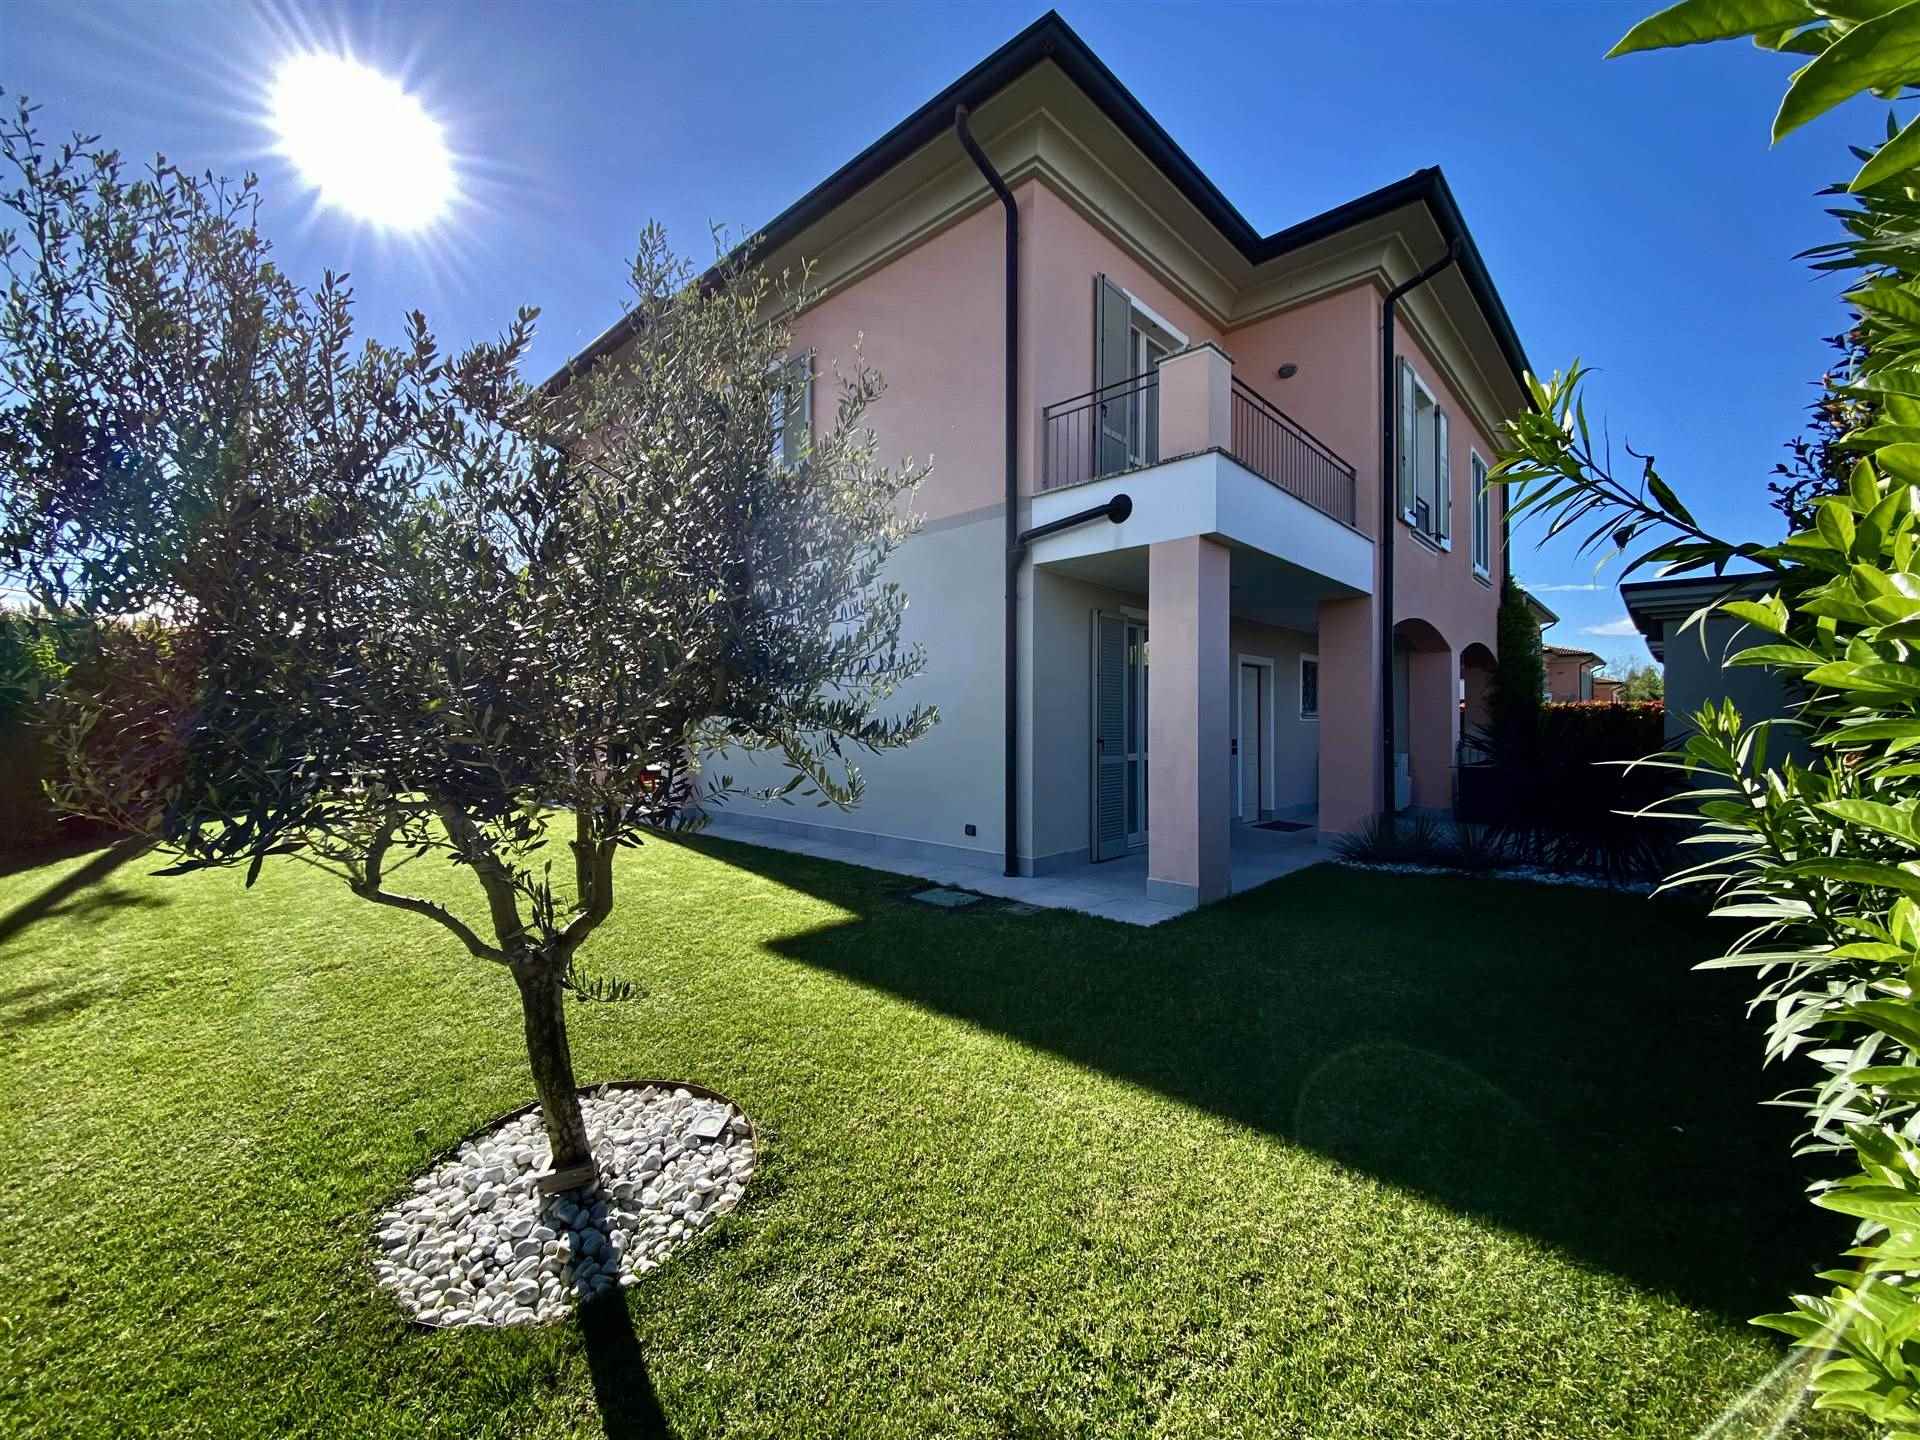 CROCIALE, MANERBA DEL GARDA, Duplex villa for sale of 130 Sq. mt., Excellent Condition, Heating Individual heating system, Energetic class: D, placed 